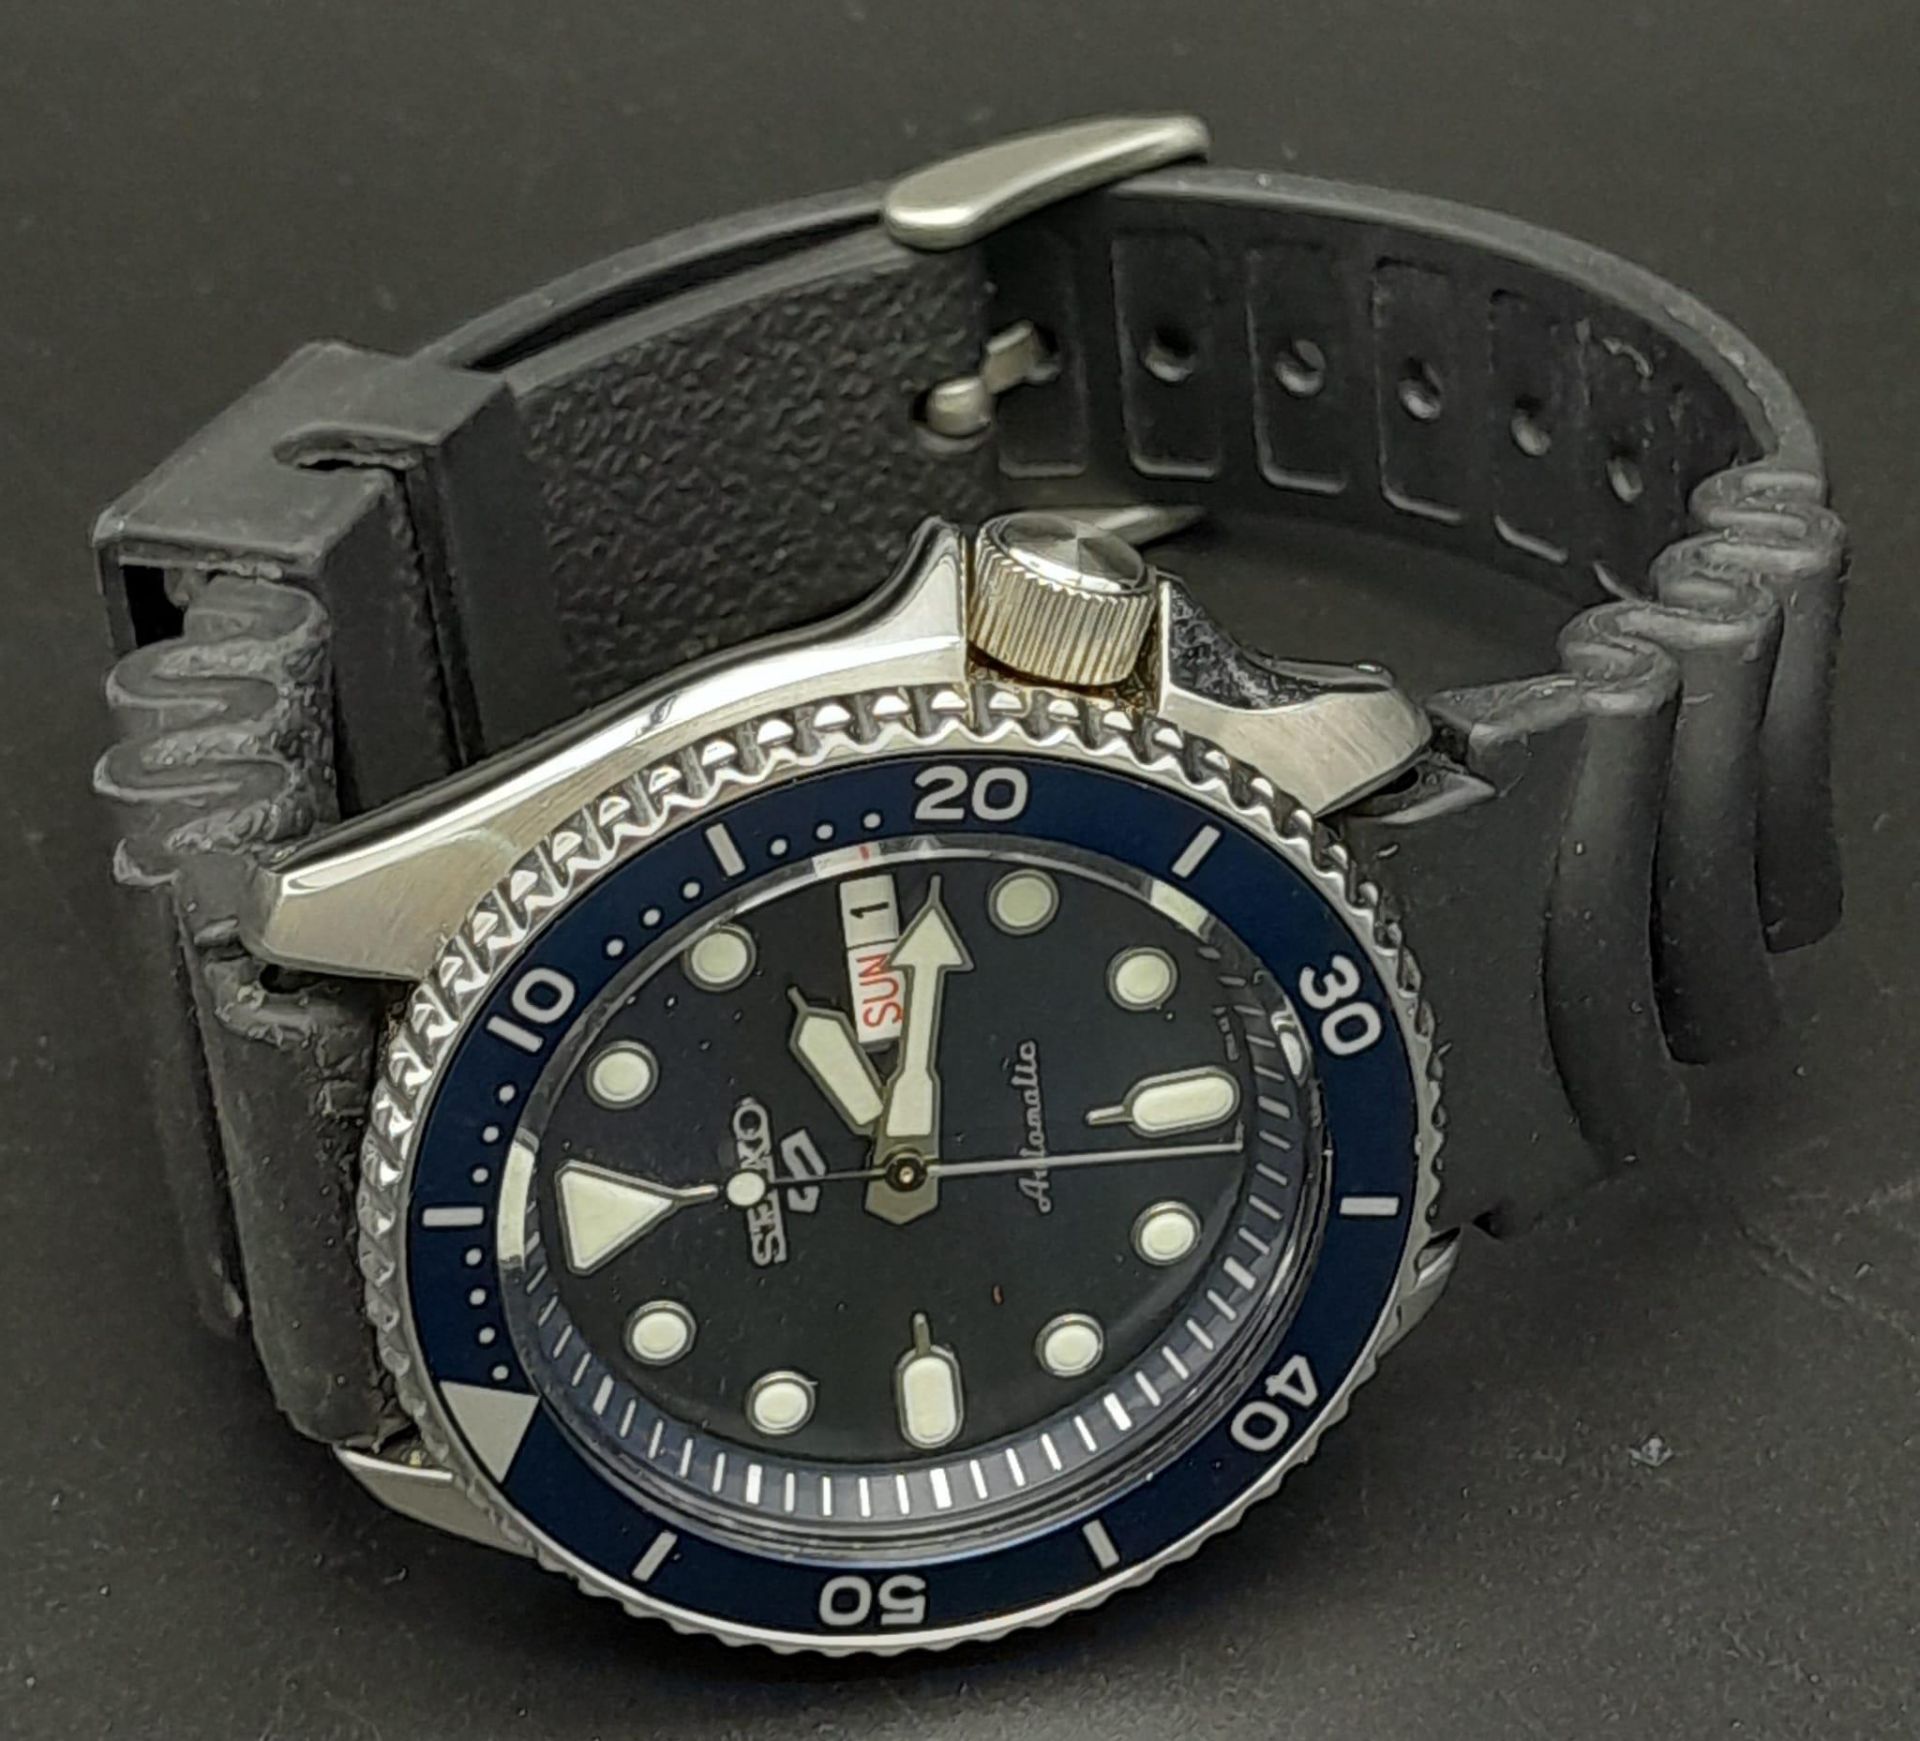 A Vintage Seiko Automatic Gents Watch. Black rubber strap. Stainless steel case with movable bezel - - Image 4 of 11